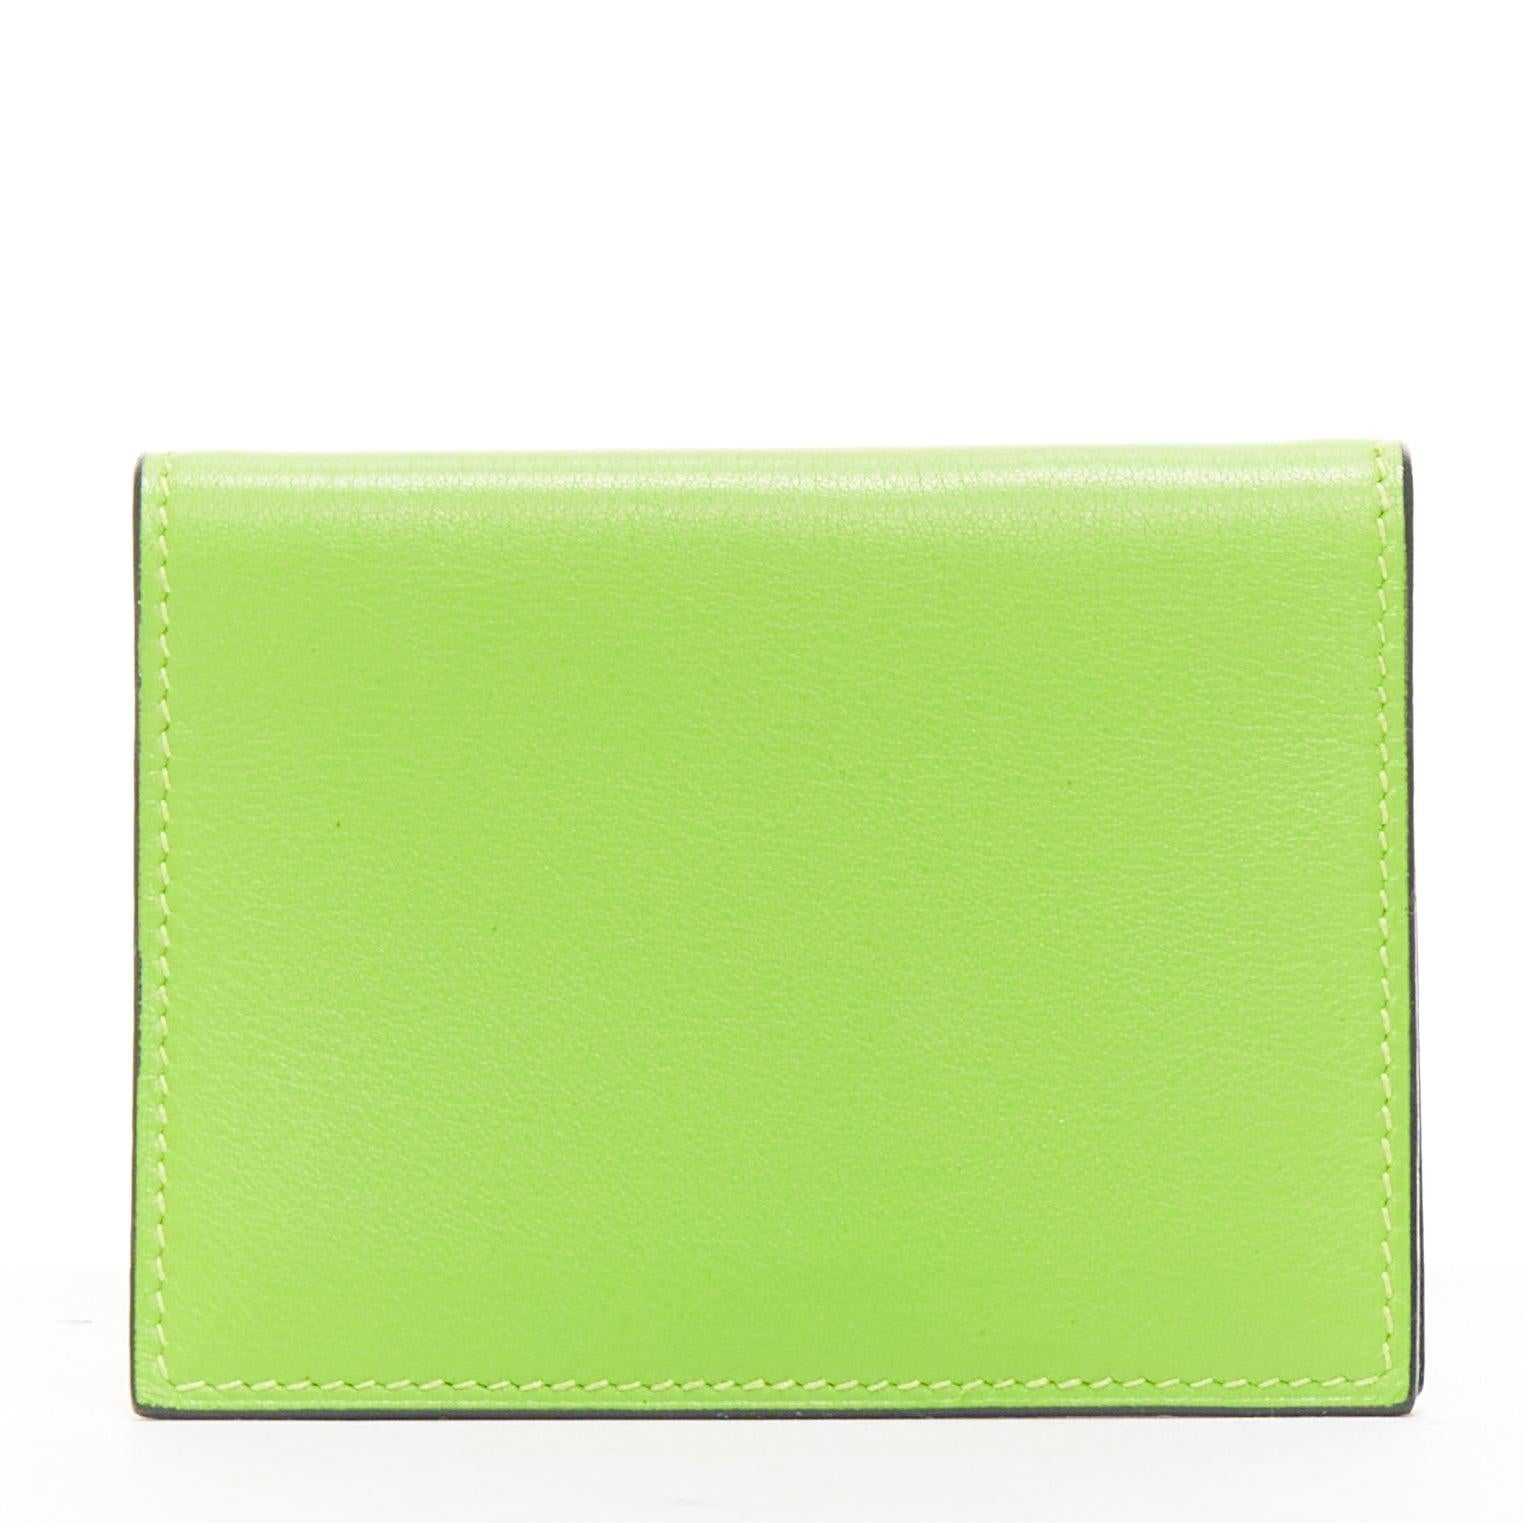 Women's HERMES neon green smooth leather silver hardware bifold cardholder For Sale